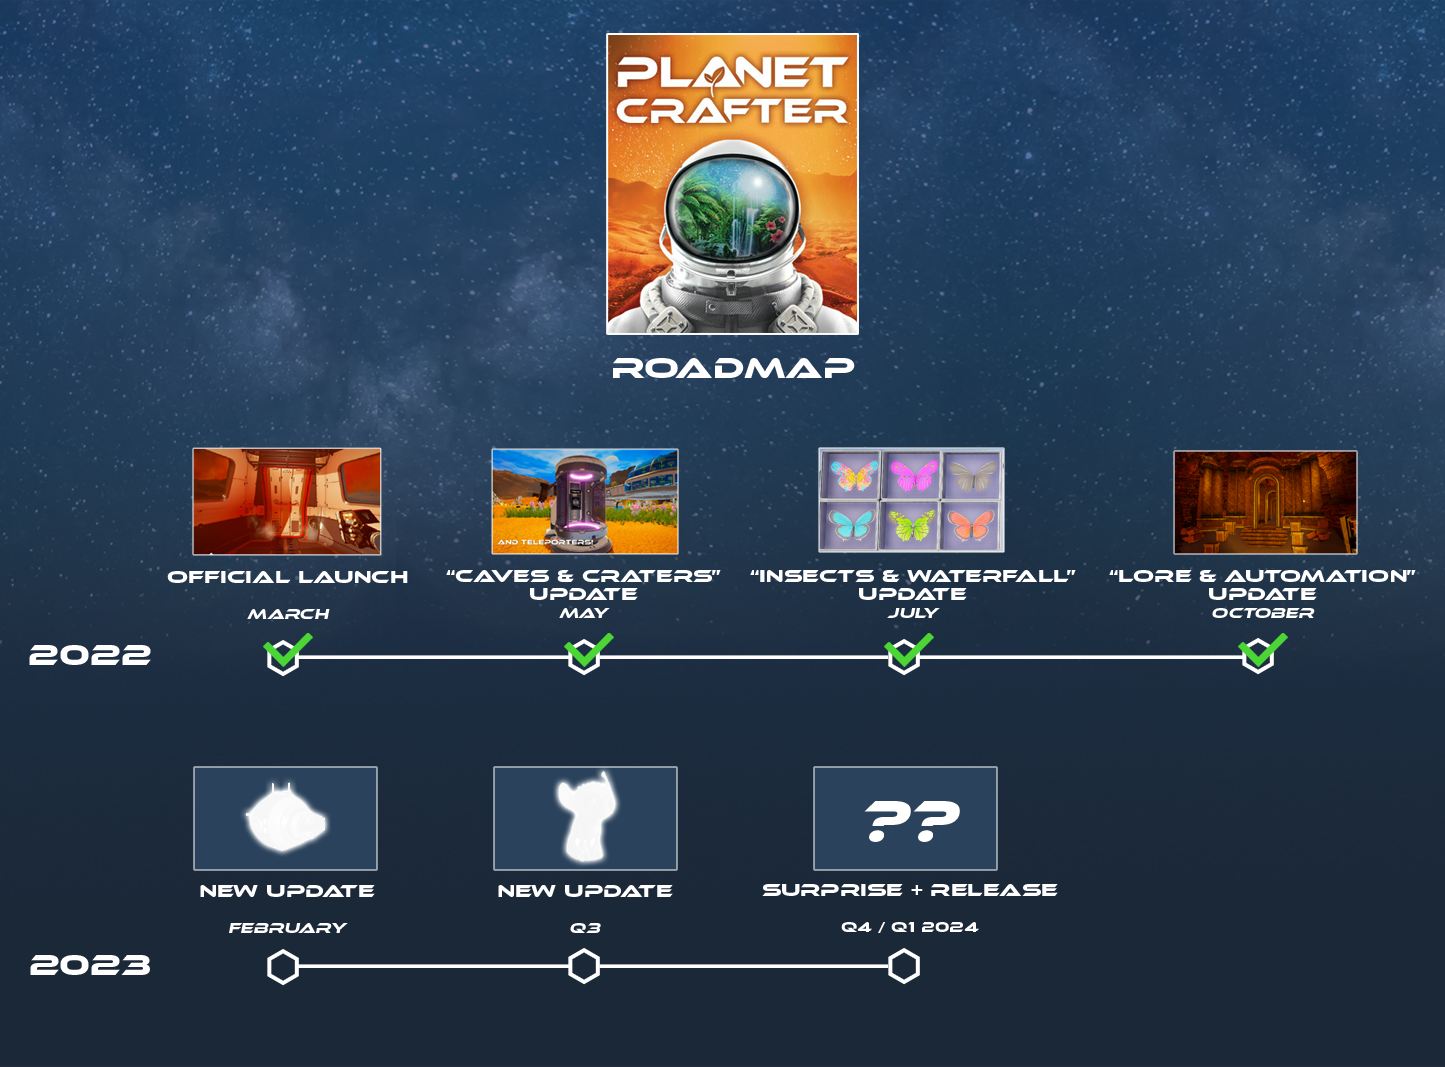 Planet crafter читы. The Planet Crafter карта 2023. The Planet Crafter дорожная карта. Planet Crafter карта ресурсов. Дорожная карта на 2023 год for Honor.